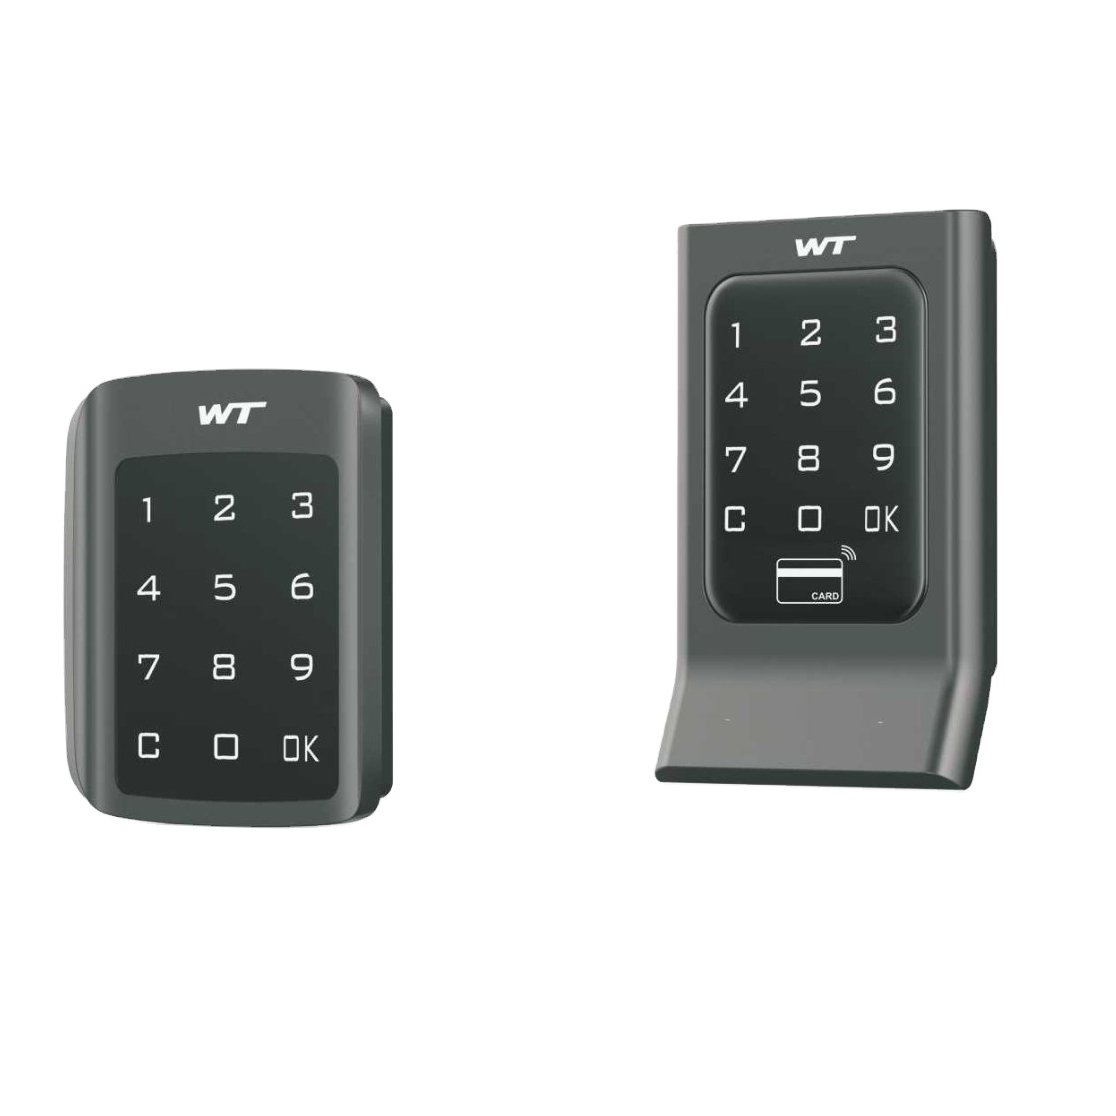 C Digital high security touch screen public and private electronic locker lock